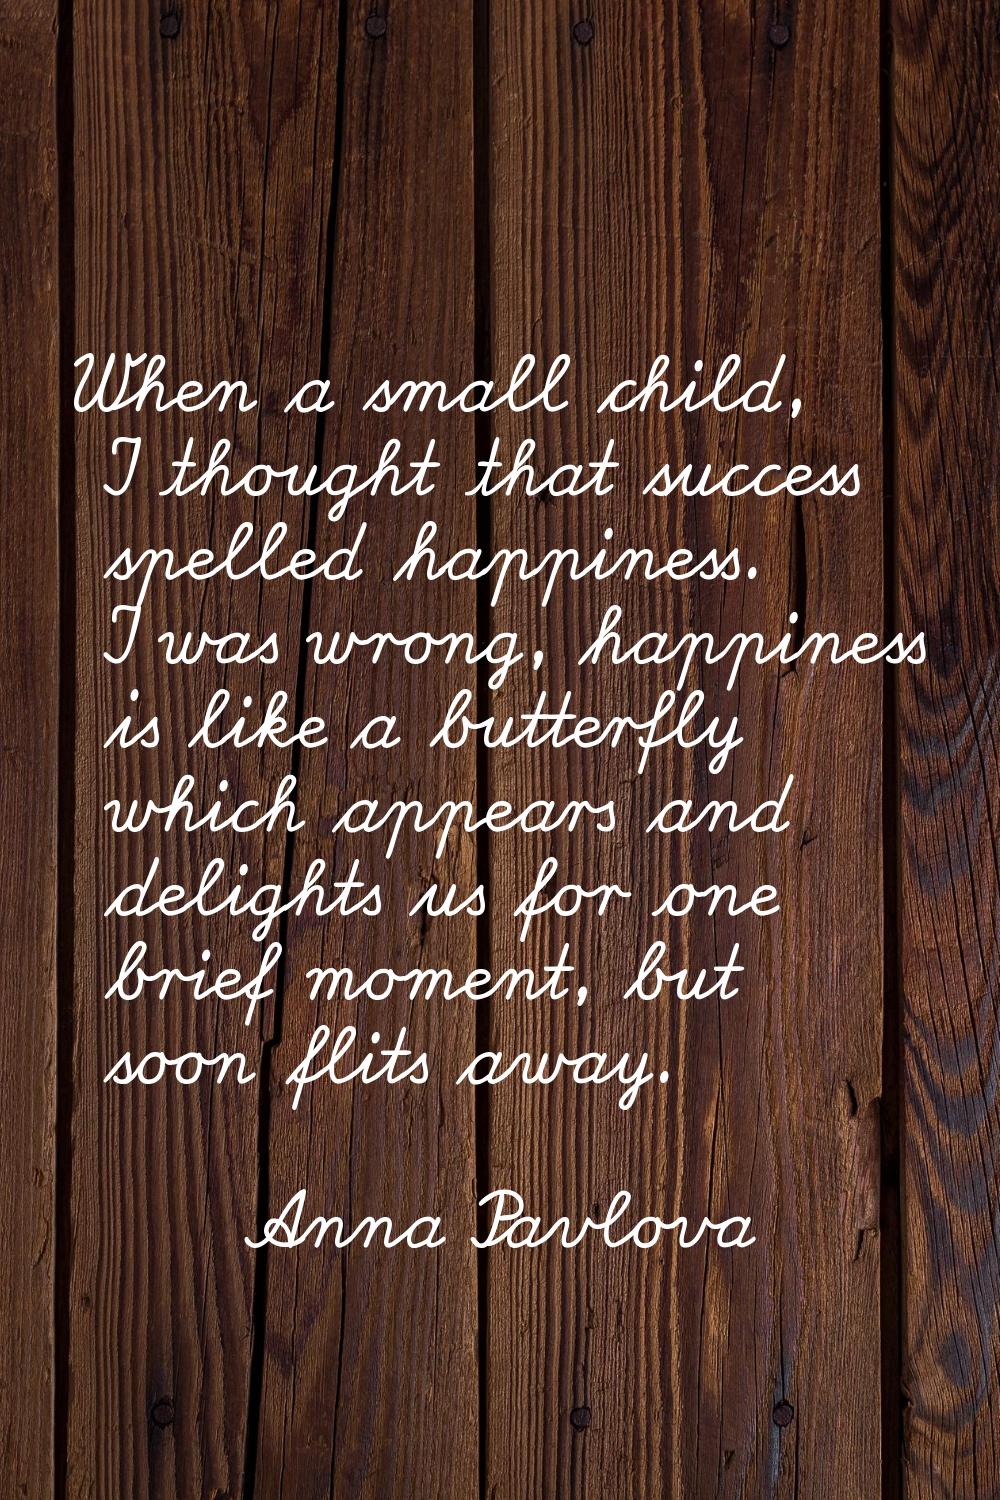 When a small child, I thought that success spelled happiness. I was wrong, happiness is like a butt